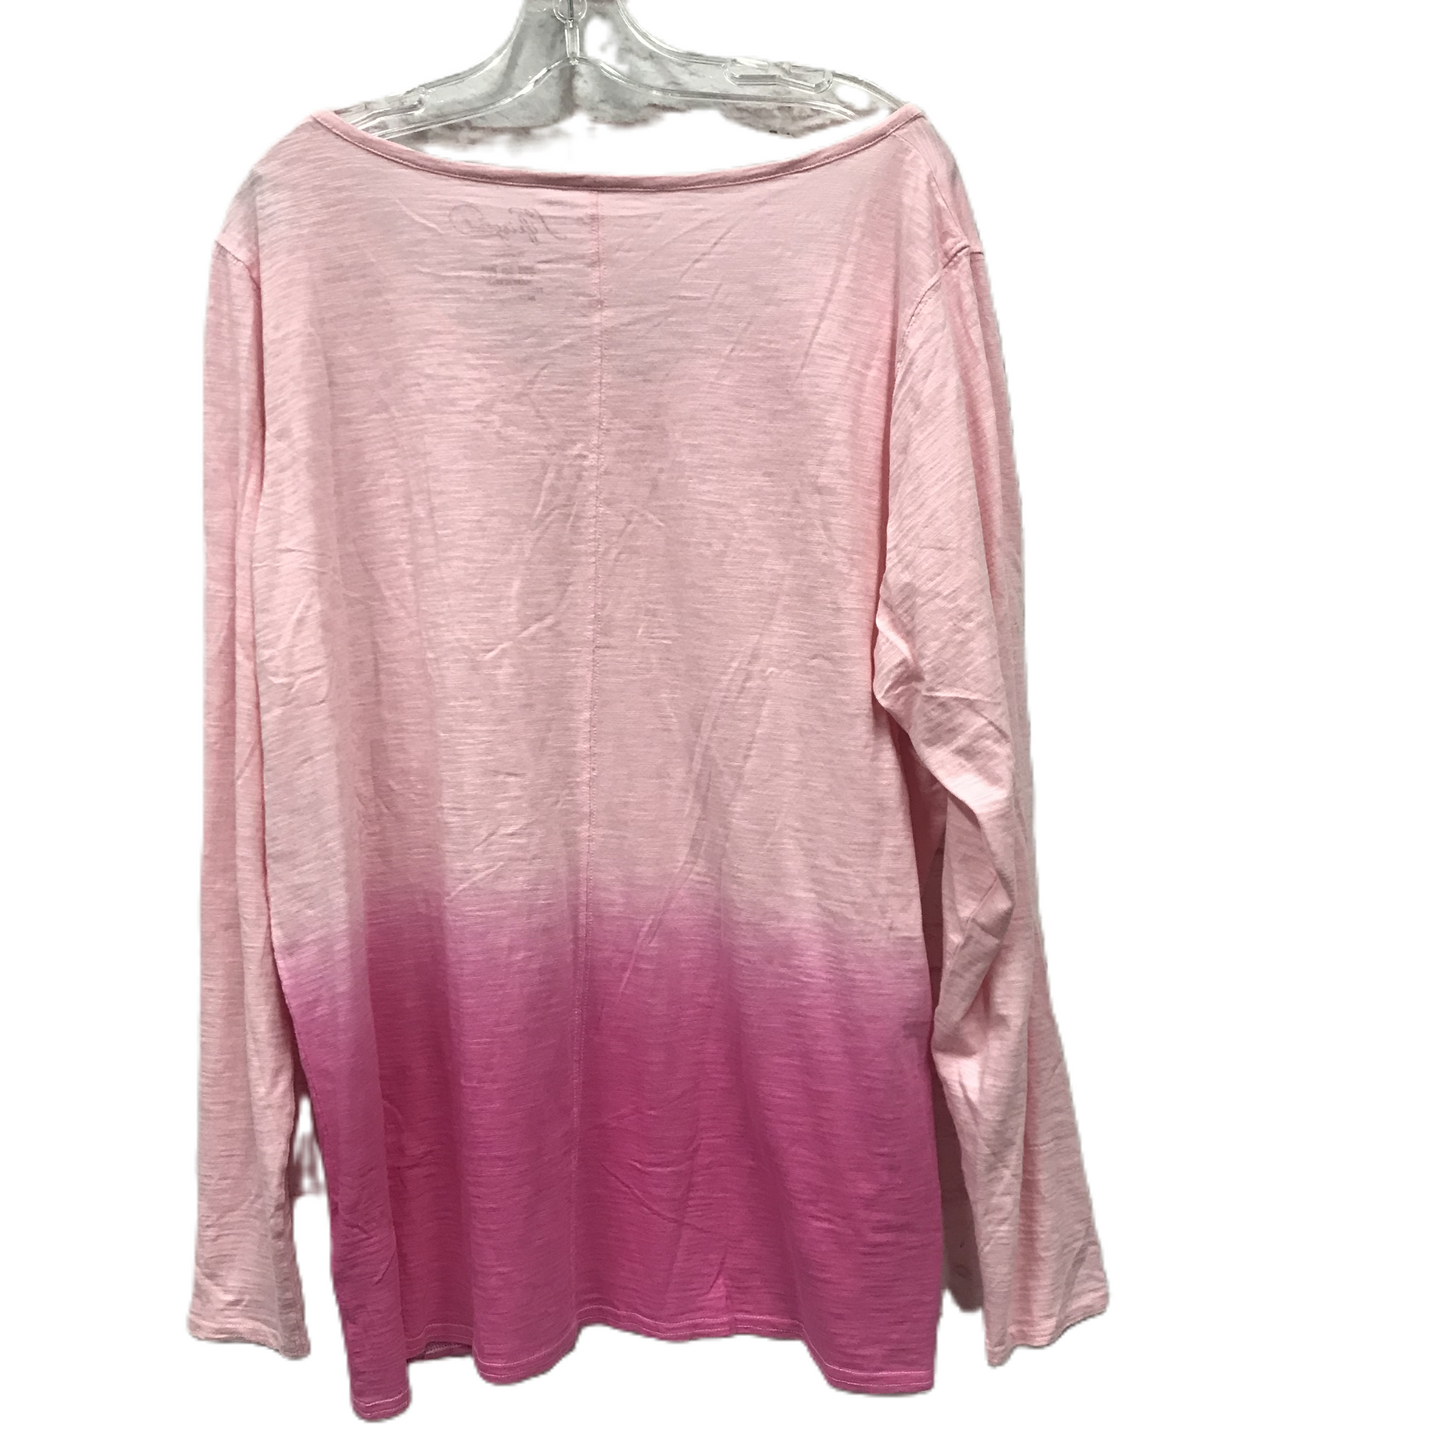 Pink Athletic Top Long Sleeve Crewneck By Life Is Good, Size: Xxl